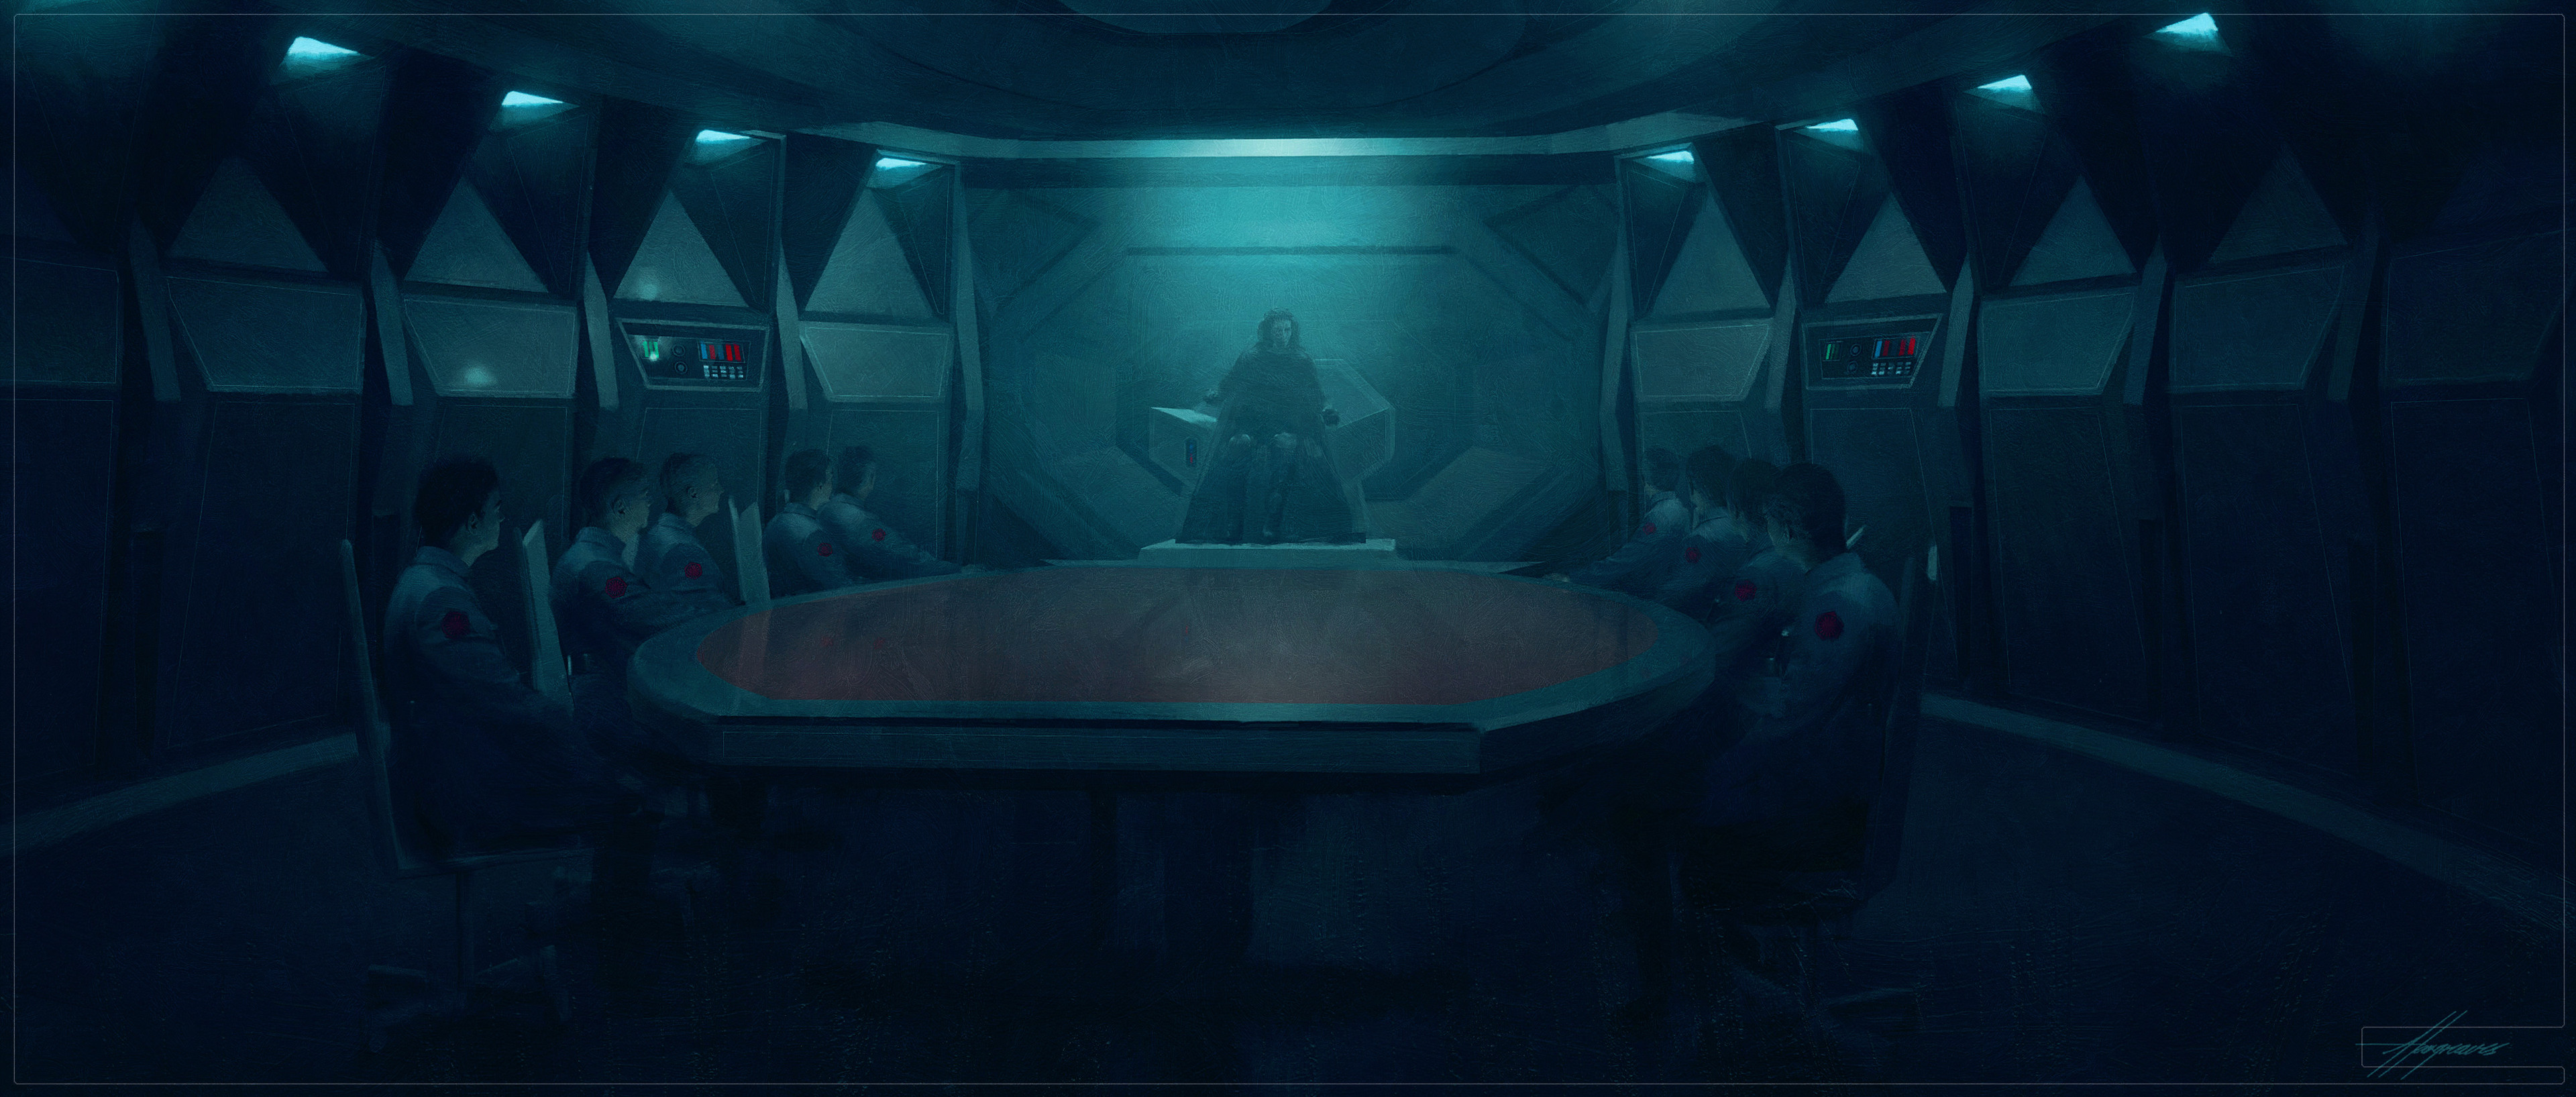 sean-hargreaves-kylo-ren-conference-room-1a2-copy.jpg